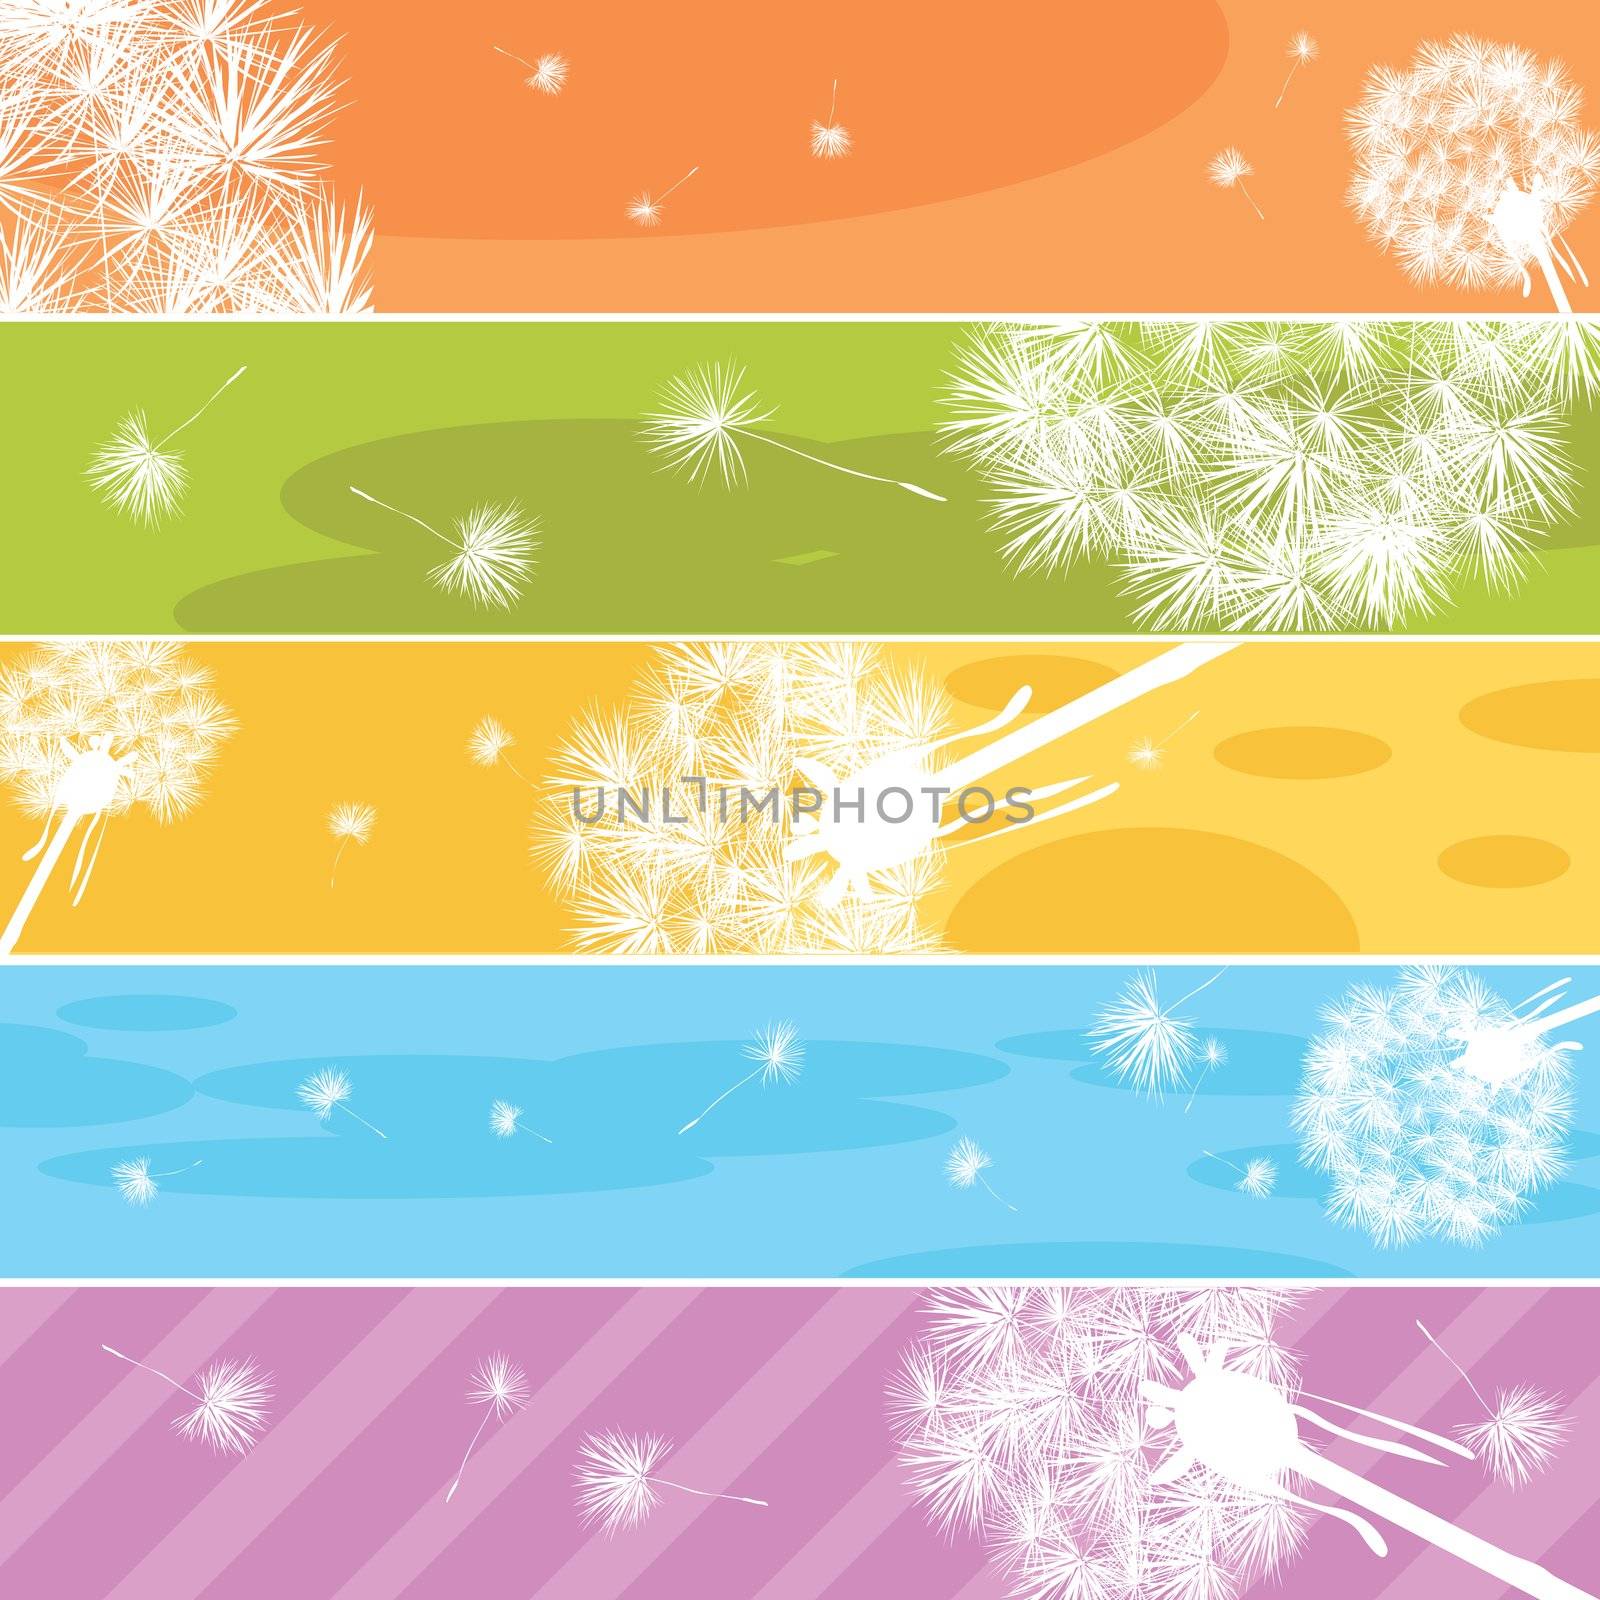 Web banners with stylized dandelions in pastels